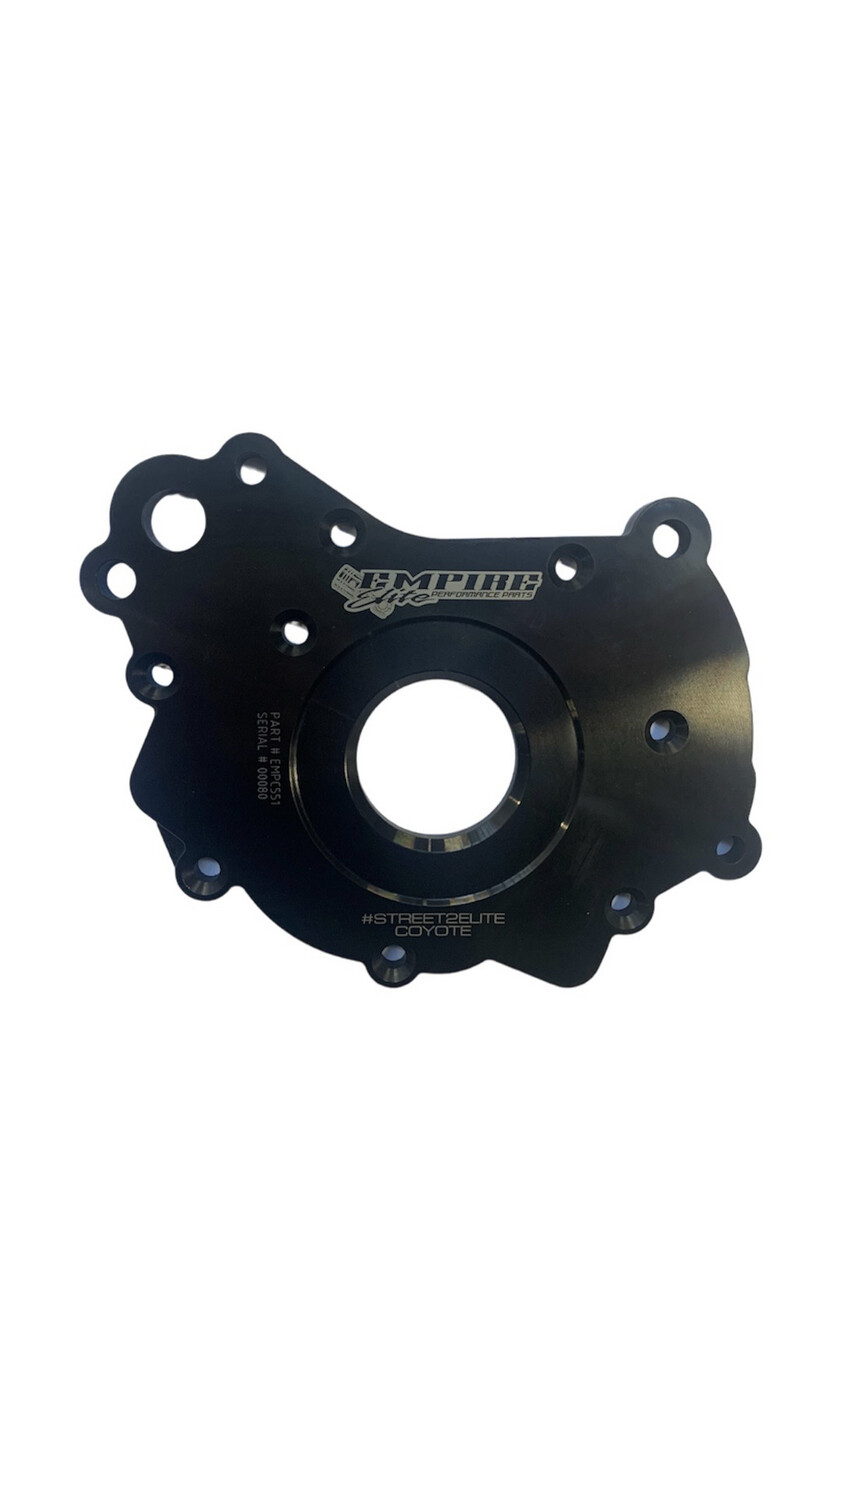 EMPIRE ELITE COYOTE OIL PUMP BACKING PLATE